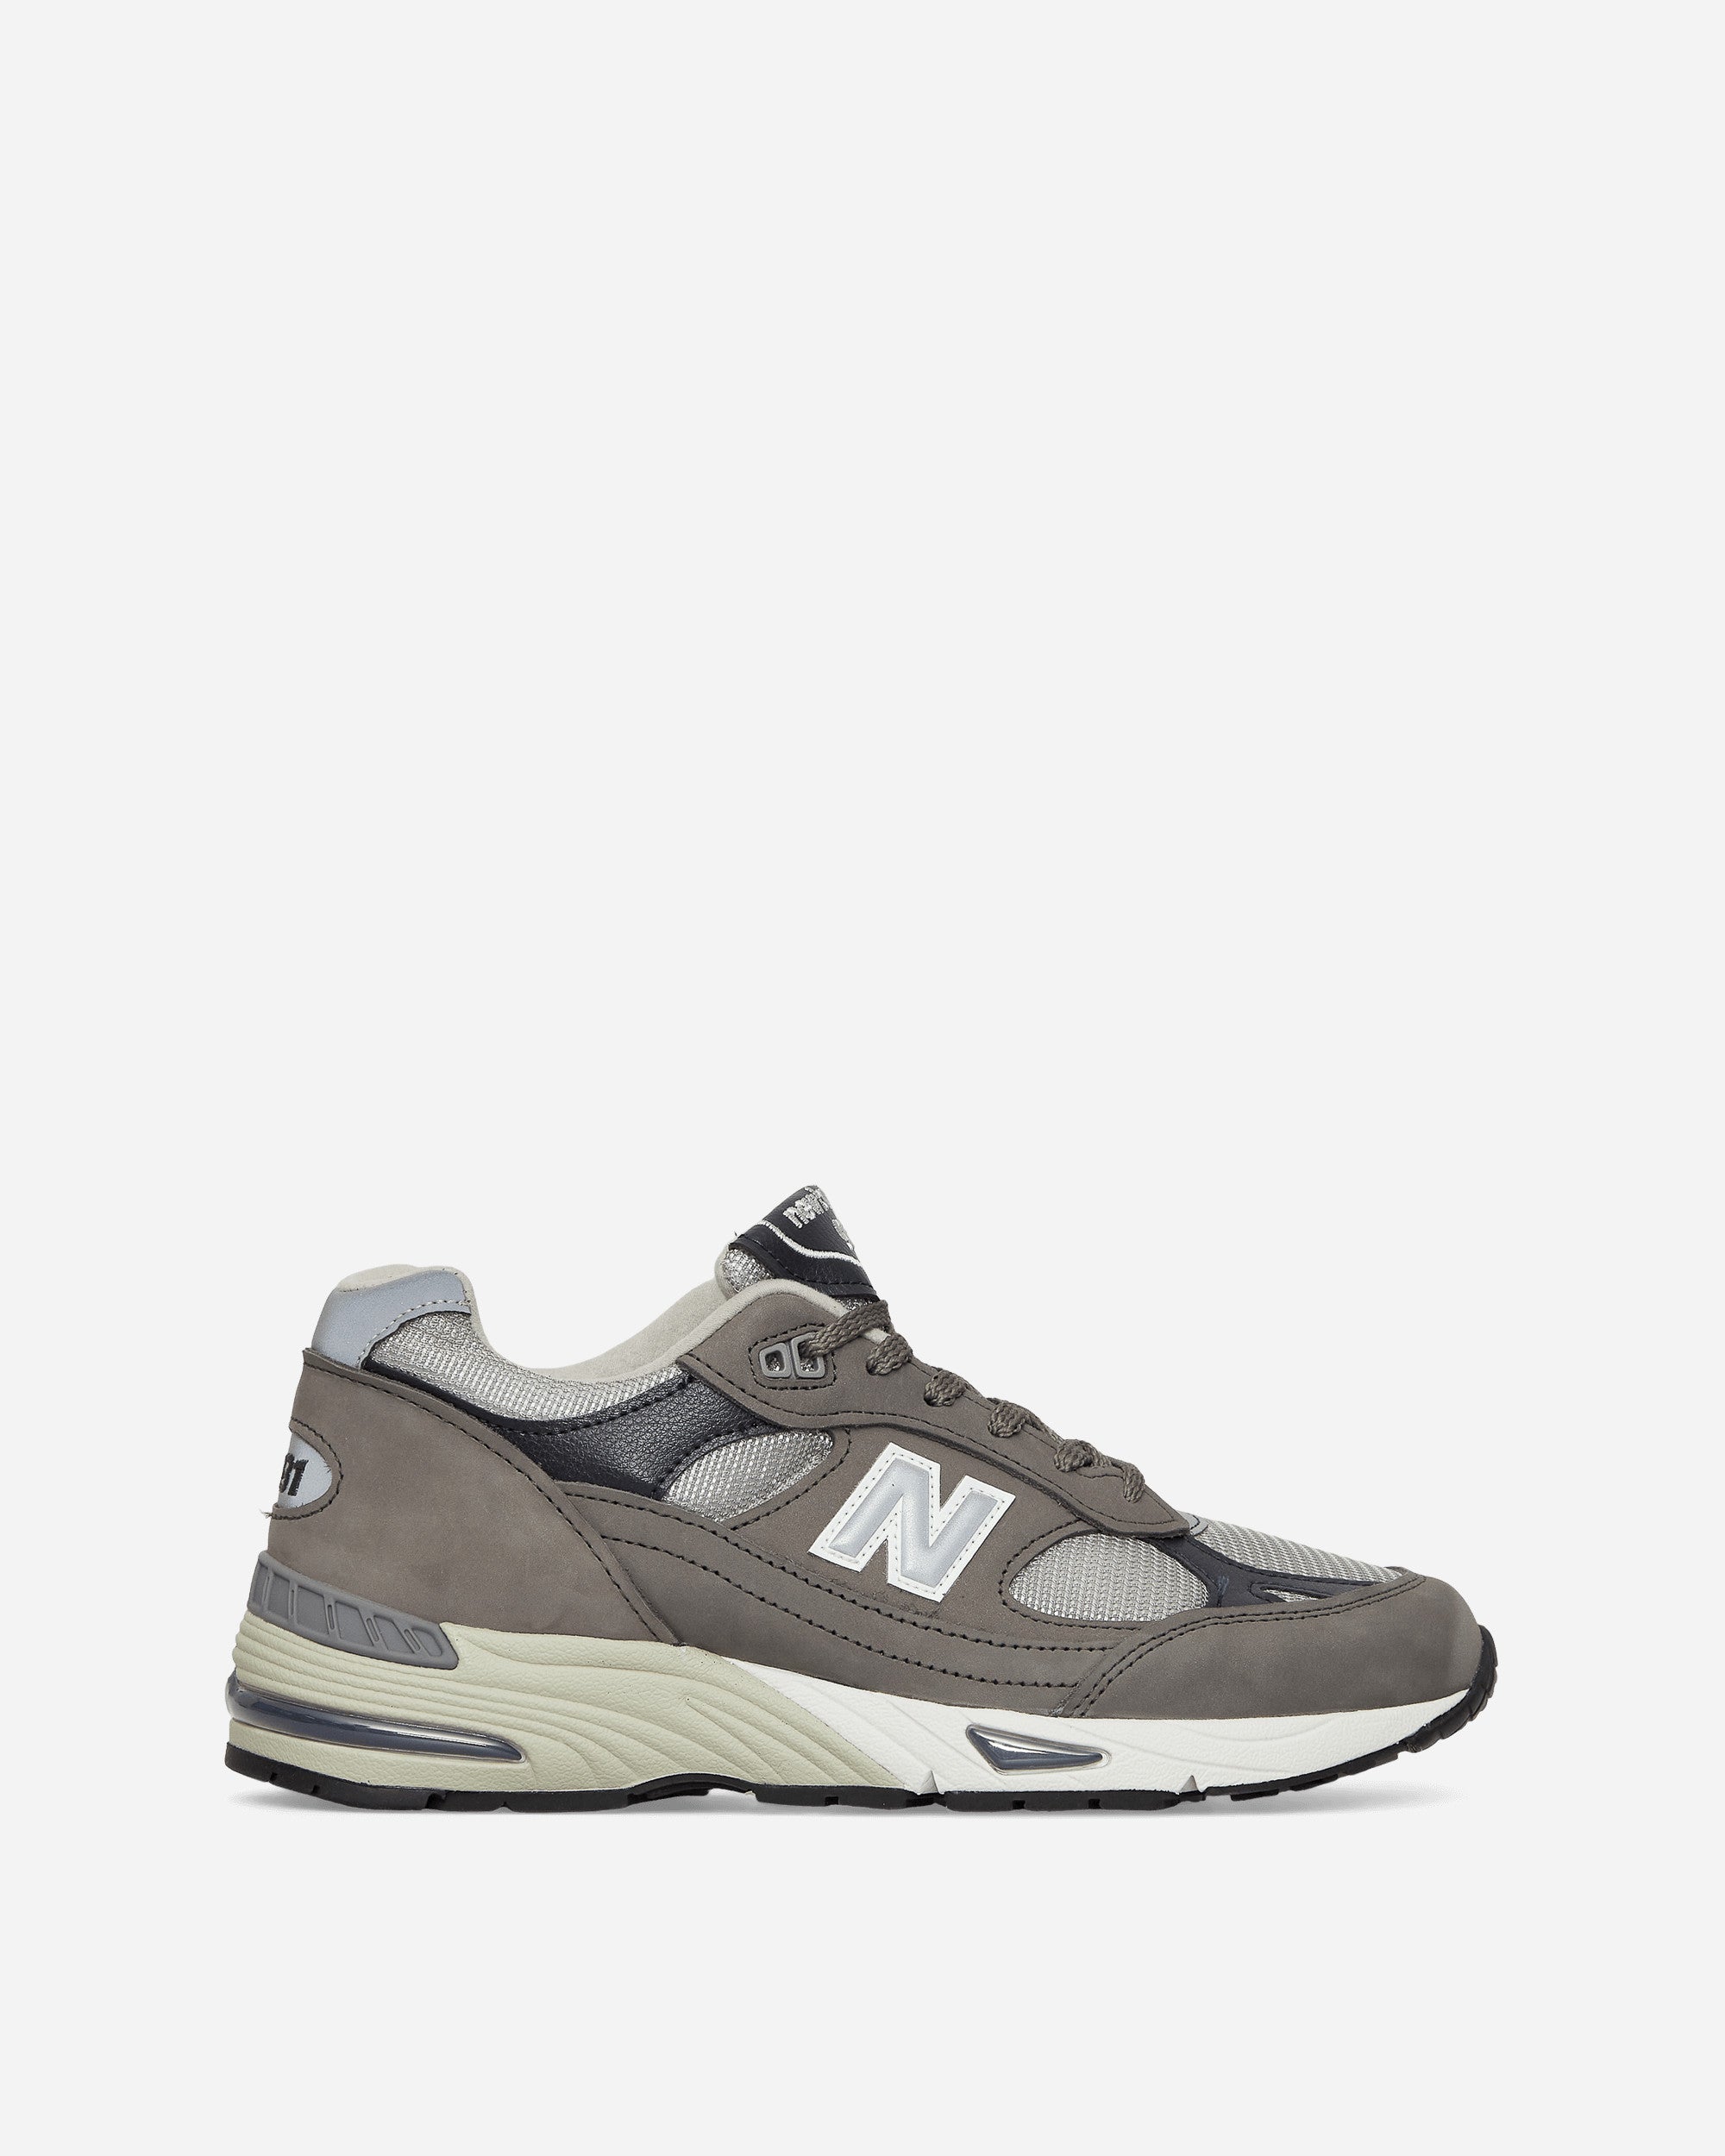 NEW BALANCE WMNS MADE IN UK 991 SNEAKERS GREY / NAVY